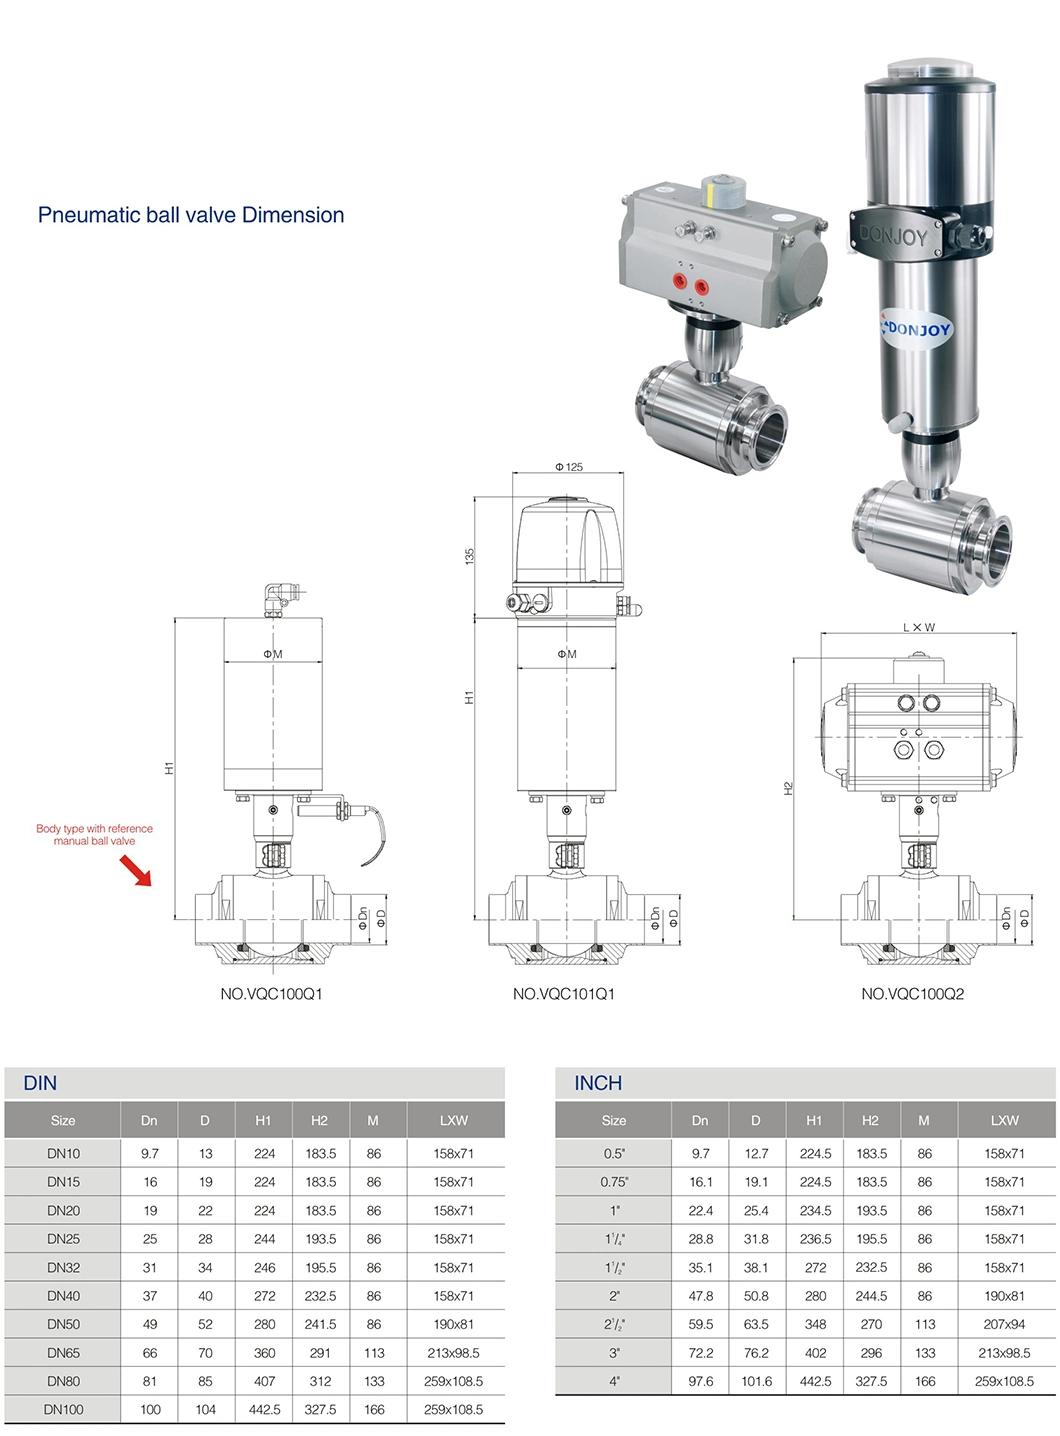 Us 3A Donjoy Sanitary Ball Valve with Control Top